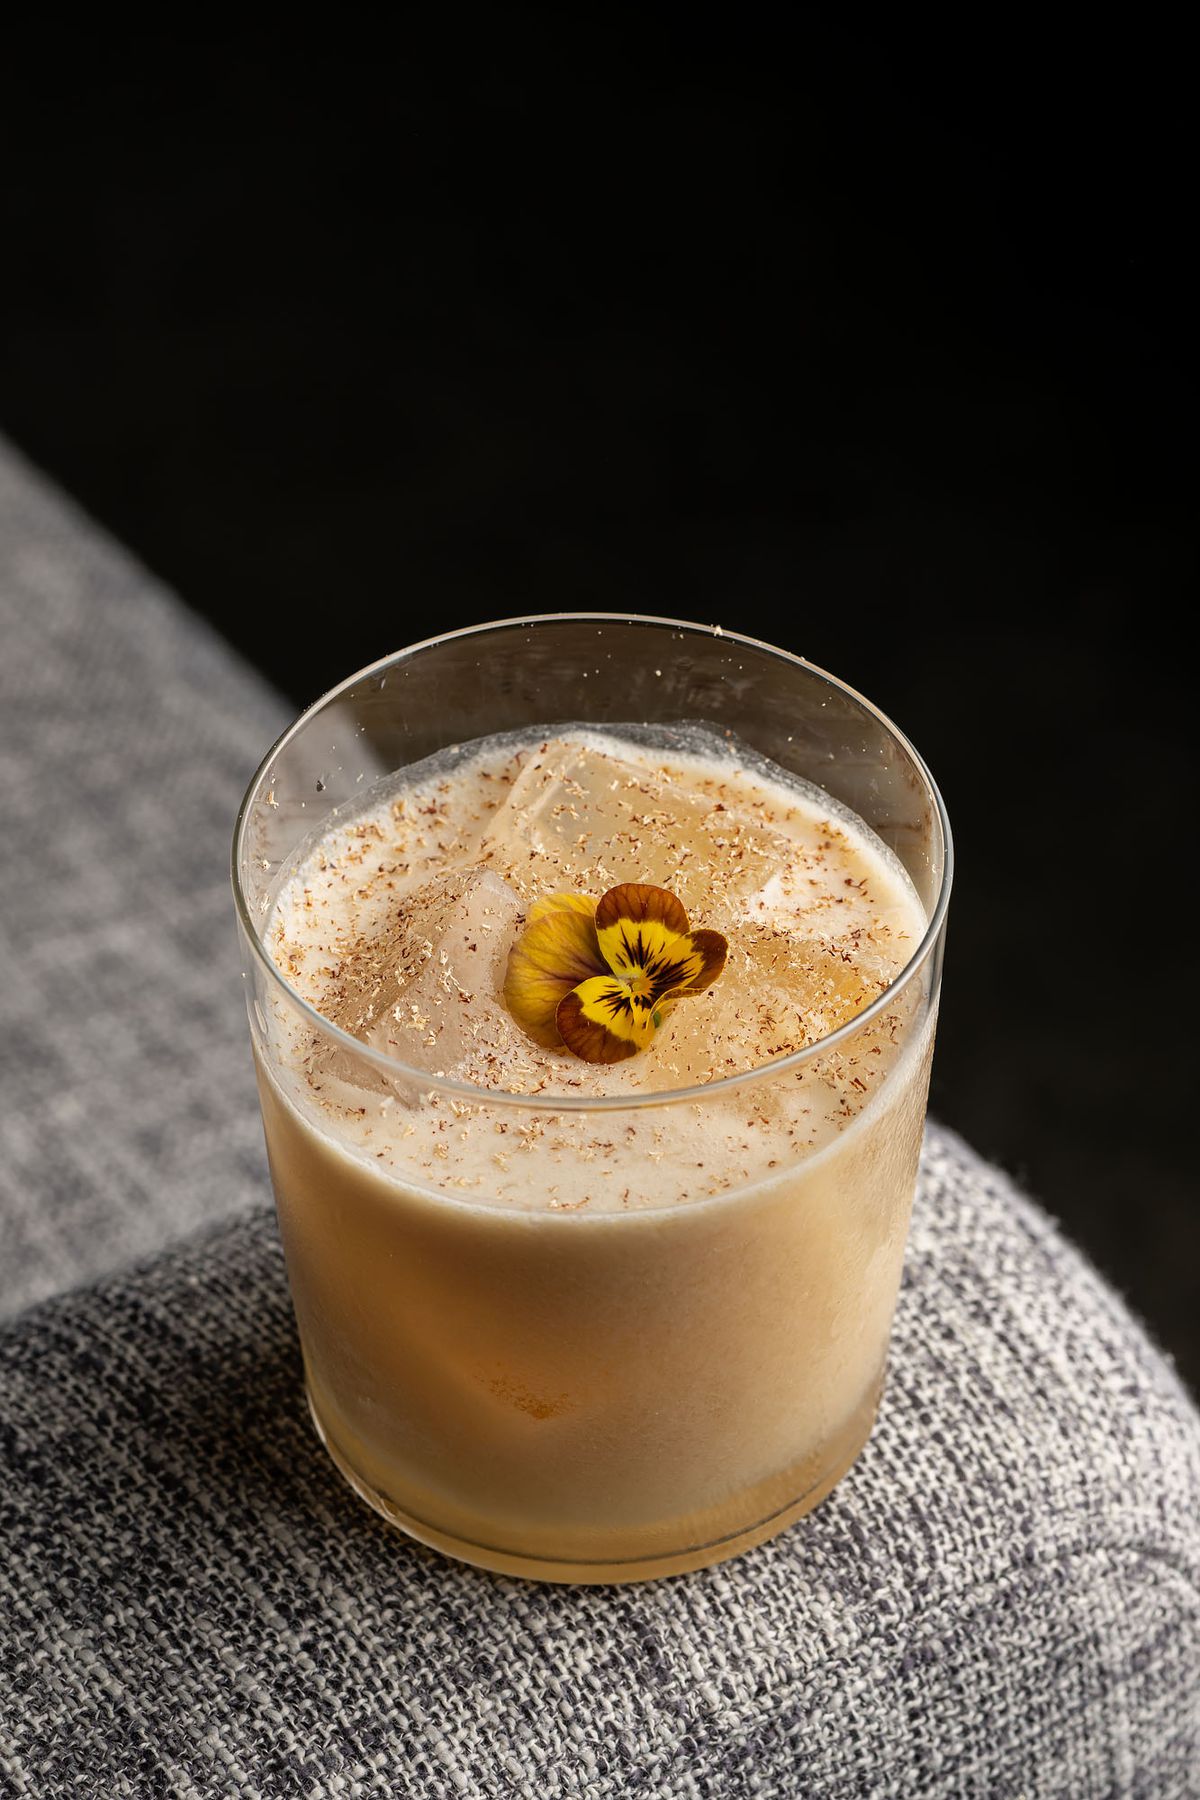 A glass filled with beige liquid with a yellow-brown flower floating on top.